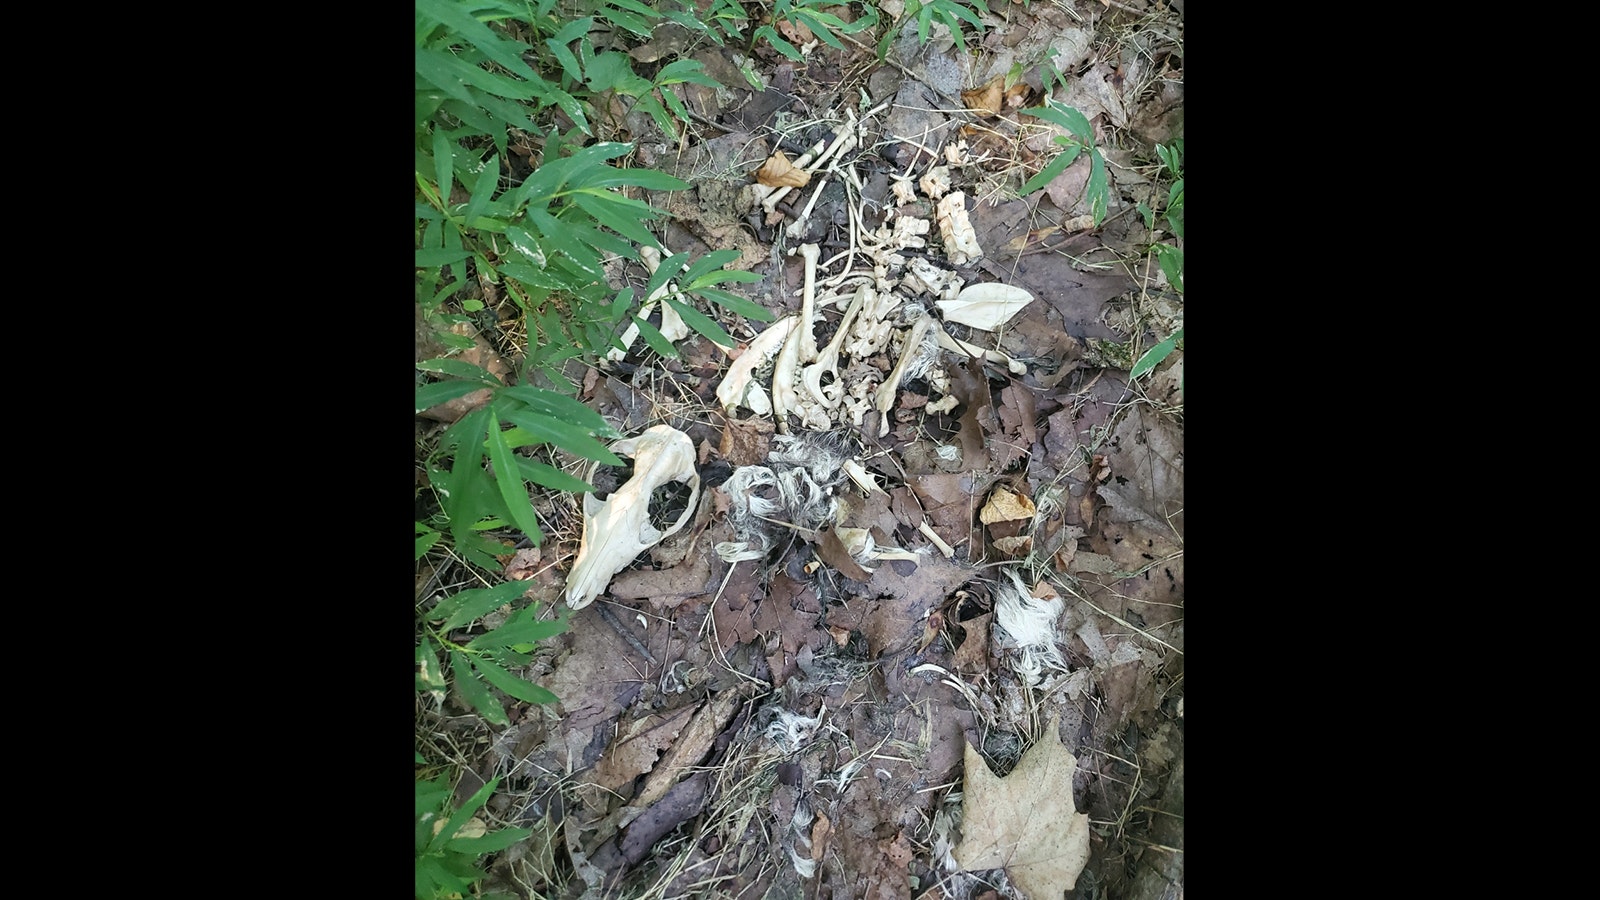 This photo of deer bones was taken by West Virginia hunter David Stiltner, who said his state has gone through devastating deer losses, such as what Wyoming is experiencing now. He admires many hunters giving up their Wyoming deer tags this year.